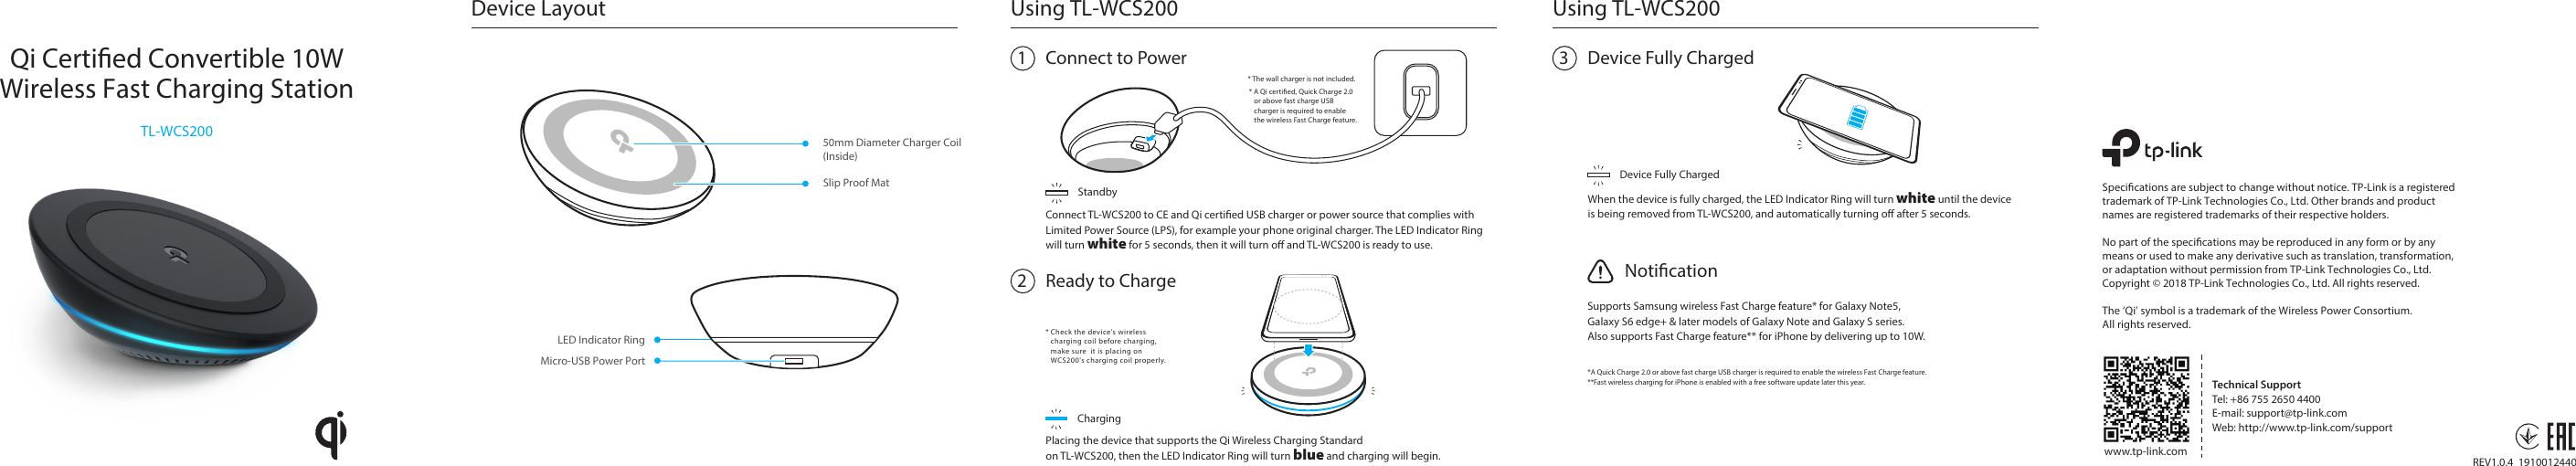 1Using TL-WCS200Connect to PowerStandbyConnect TL-WCS200 to CE and Qi certied USB charger or power source that complies withLimited Power Source (LPS), for example your phone original charger. The LED Indicator Ring will turn white for 5 seconds, then it will turn o and TL-WCS200 is ready to use.50mm Diameter Charger Coil(Inside)Device LayoutSlip Proof MatMicro-USB Power PortLED Indicator Ring2* Check the device&apos;s wireless   charging coil before charging,   make sure  it is placing on   WCS200&apos;s charging coil properly.Placing the device that supports the Qi Wireless Charging Standard on TL-WCS200, then the LED Indicator Ring will turn blue and charging will begin.ChargingReady to Charge* The wall charger is not included.* A Qi certied, Quick Charge 2.0   or above fast charge USB   charger is required to enable   the wireless Fast Charge feature.Qi Certied Convertible 10WWireless Fast Charging StationTL-WCS200REV1.0.4  1910012440Specications are subject to change without notice. TP-Link is a registered trademark of TP-Link Technologies Co., Ltd. Other brands and product names are registered trademarks of their respective holders.  No part of the specications may be reproduced in any form or by any means or used to make any derivative such as translation, transformation, or adaptation without permission from TP-Link Technologies Co., Ltd. Copyright © 2018 TP-Link Technologies Co., Ltd. All rights reserved.The ‘Qi’ symbol is a trademark of the Wireless Power Consortium. All rights reserved. www.tp-link.comTechnical SupportTel: +86 755 2650 4400E-mail: support@tp-link.comWeb: http://www.tp-link.com/supportUsing TL-WCS2003Device Fully ChargedDevice Fully ChargedWhen the device is fully charged, the LED Indicator Ring will turn white until the deviceis being removed from TL-WCS200, and automatically turning o after 5 seconds.Supports Samsung wireless Fast Charge feature* for Galaxy Note5, Galaxy S6 edge+ &amp; later models of Galaxy Note and Galaxy S series.Also supports Fast Charge feature** for iPhone by delivering up to 10W.Notication*A Quick Charge 2.0 or above fast charge USB charger is required to enable the wireless Fast Charge feature.**Fast wireless charging for iPhone is enabled with a free software update later this year.